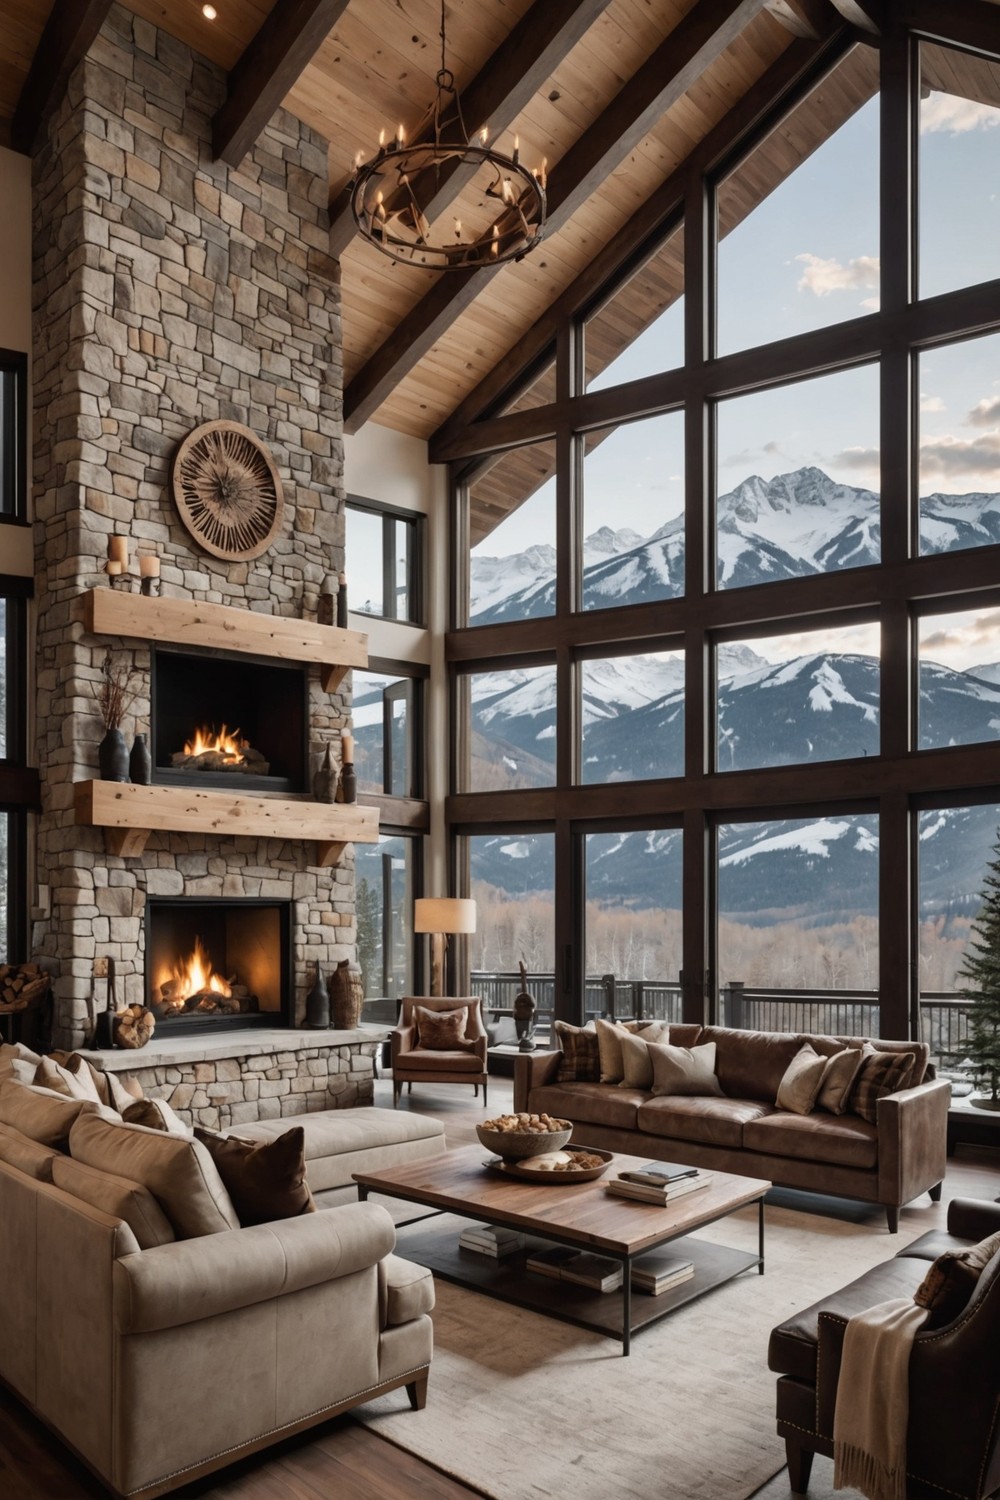 Ski-In Ski-Out Homes with Indoor-Outdoor Connections